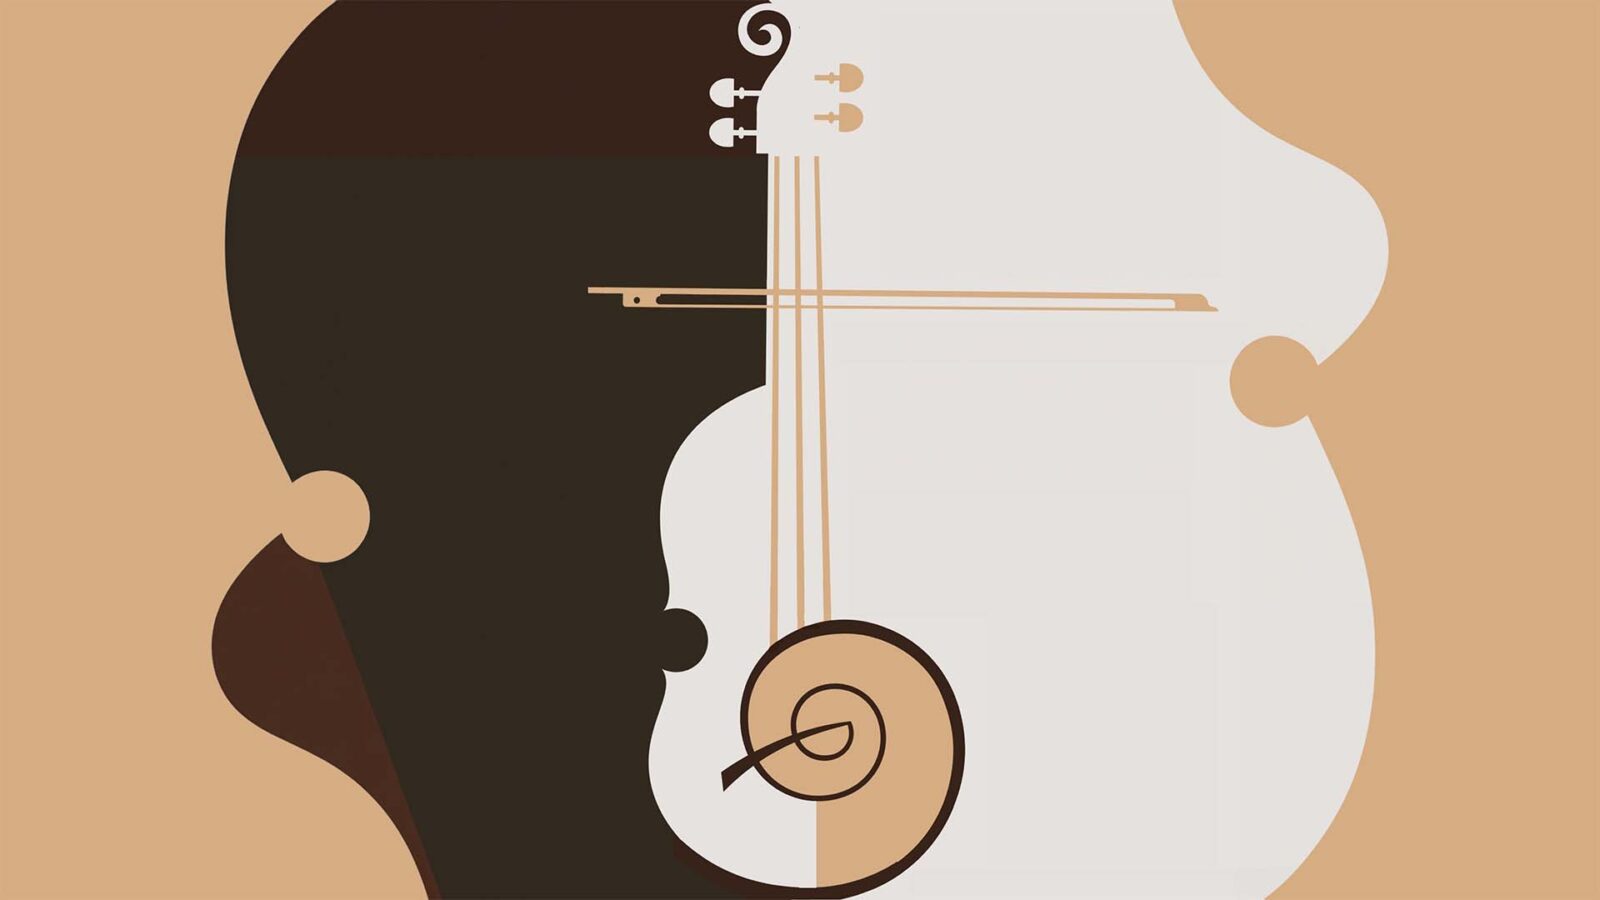 A violin silhouette, in brown and cream colors as well as white. This is an illustration